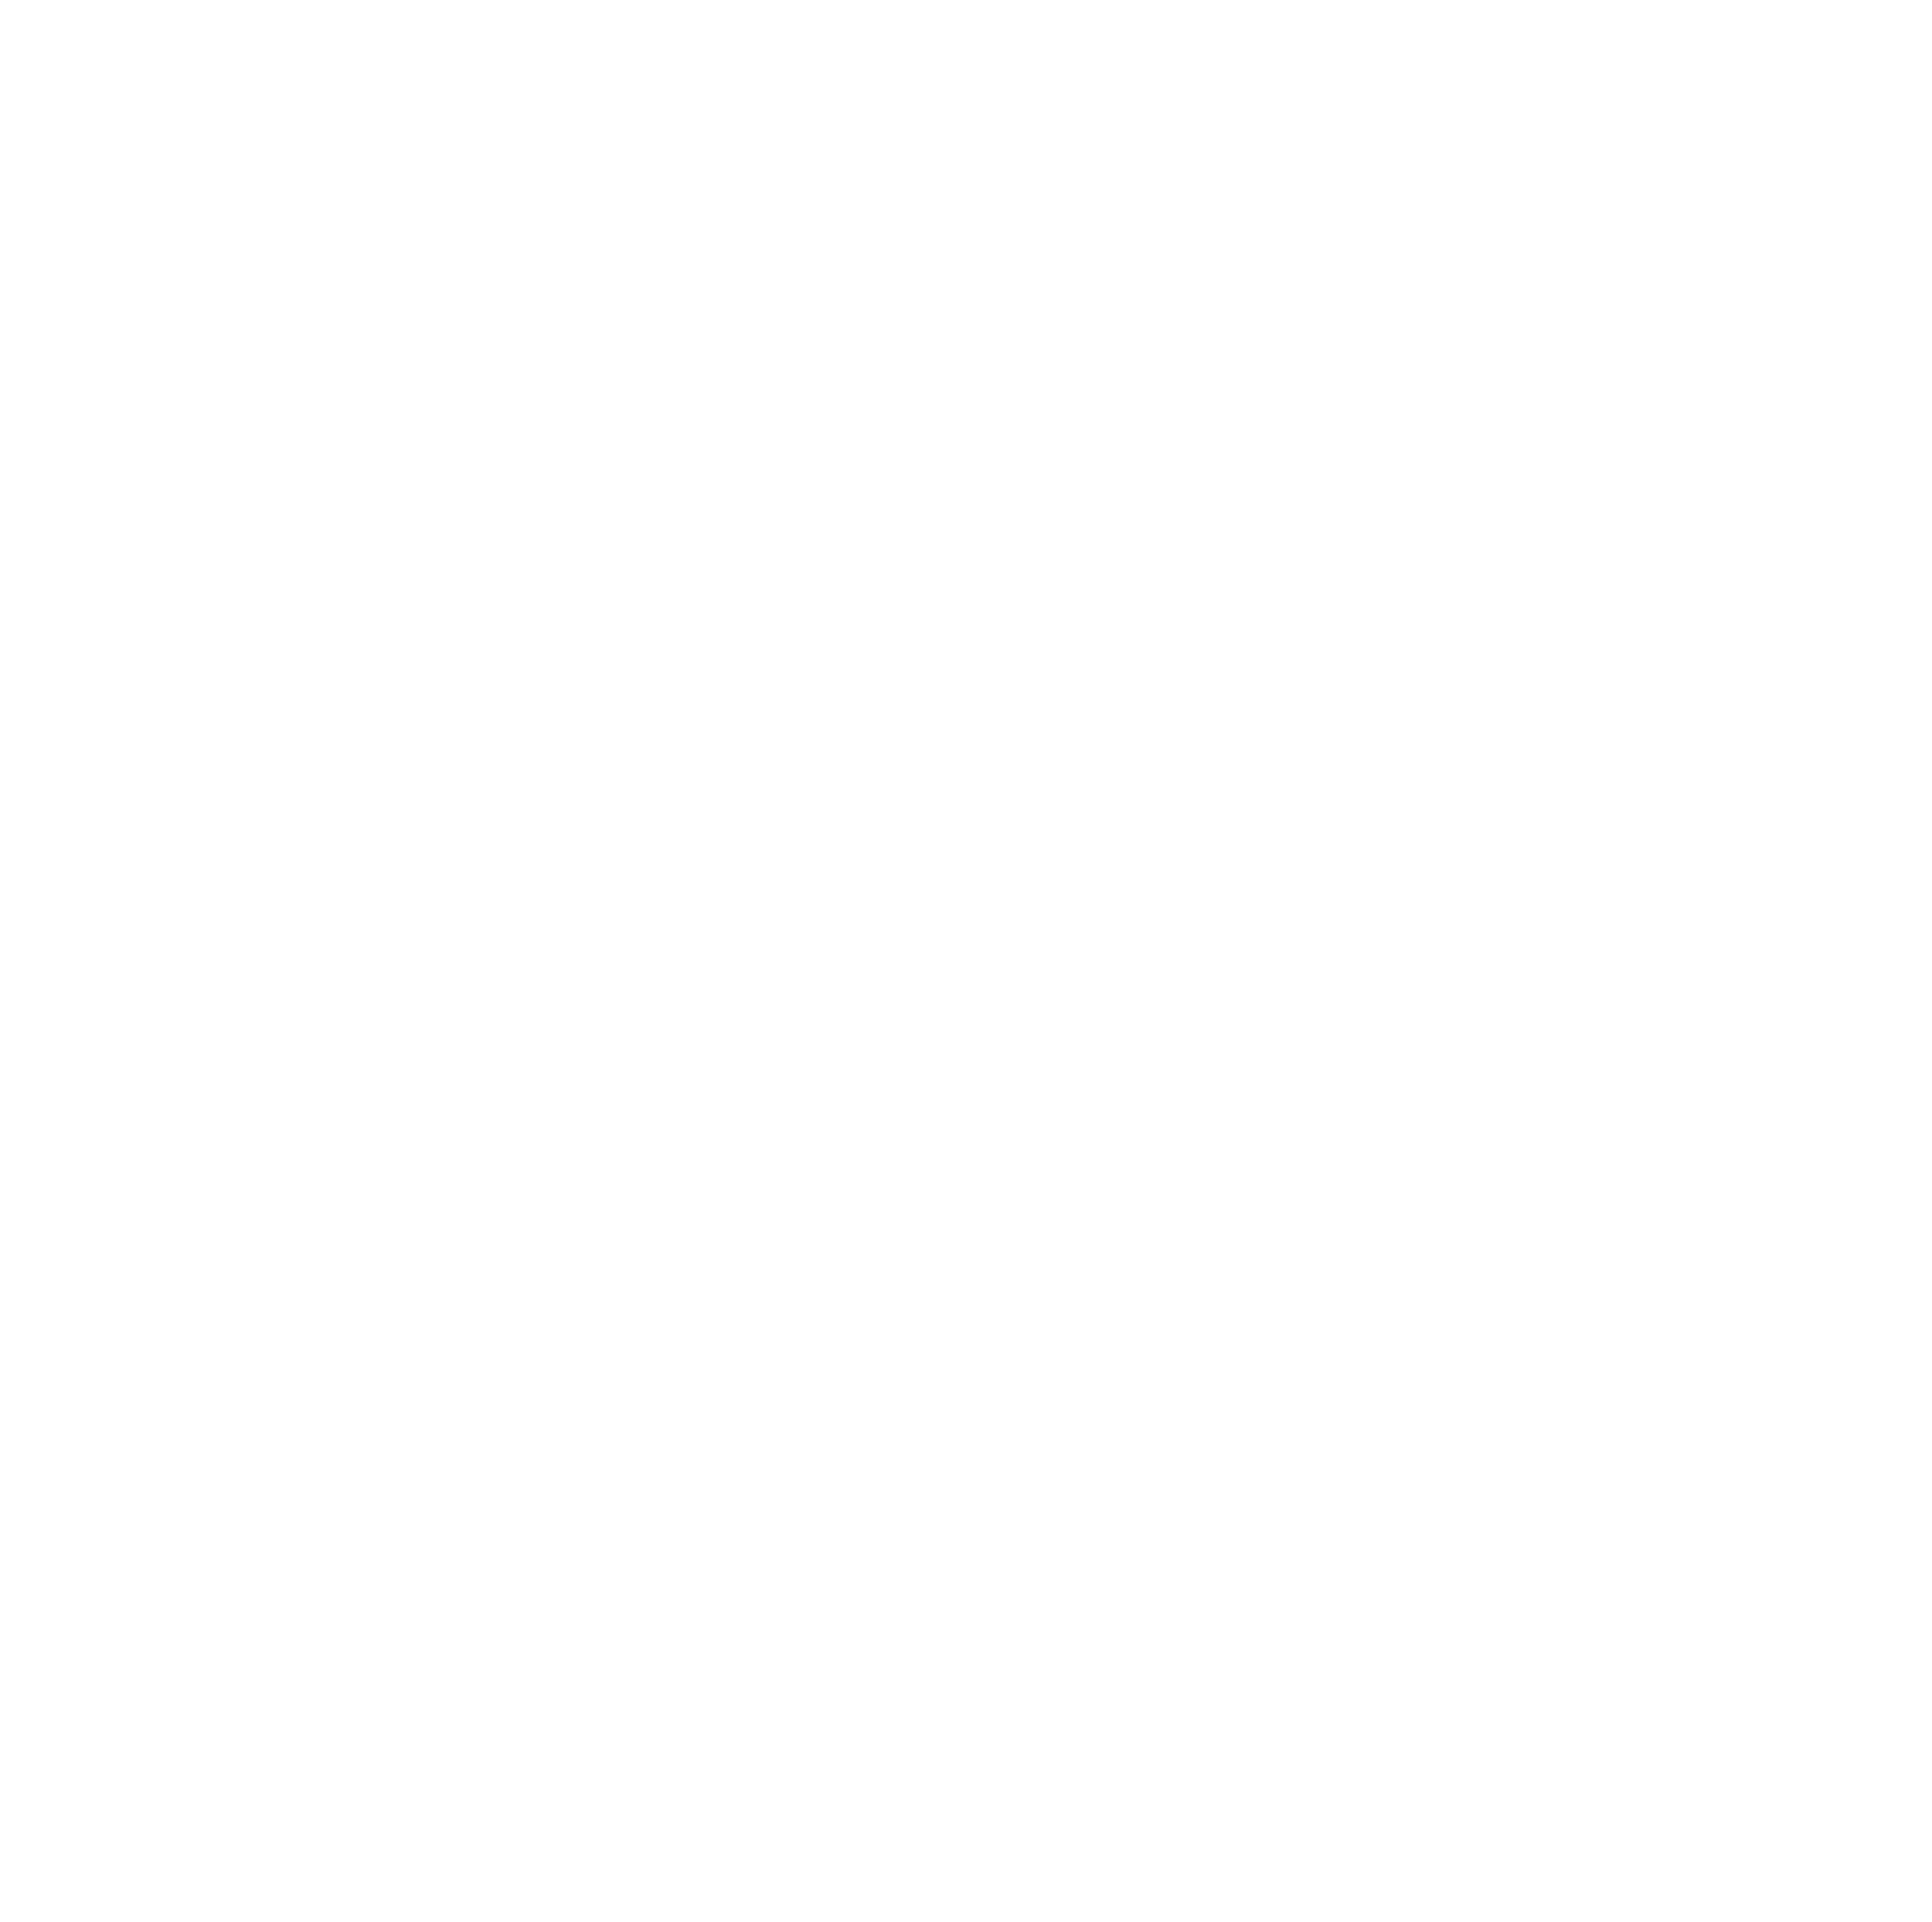 TopSpin Open 2016